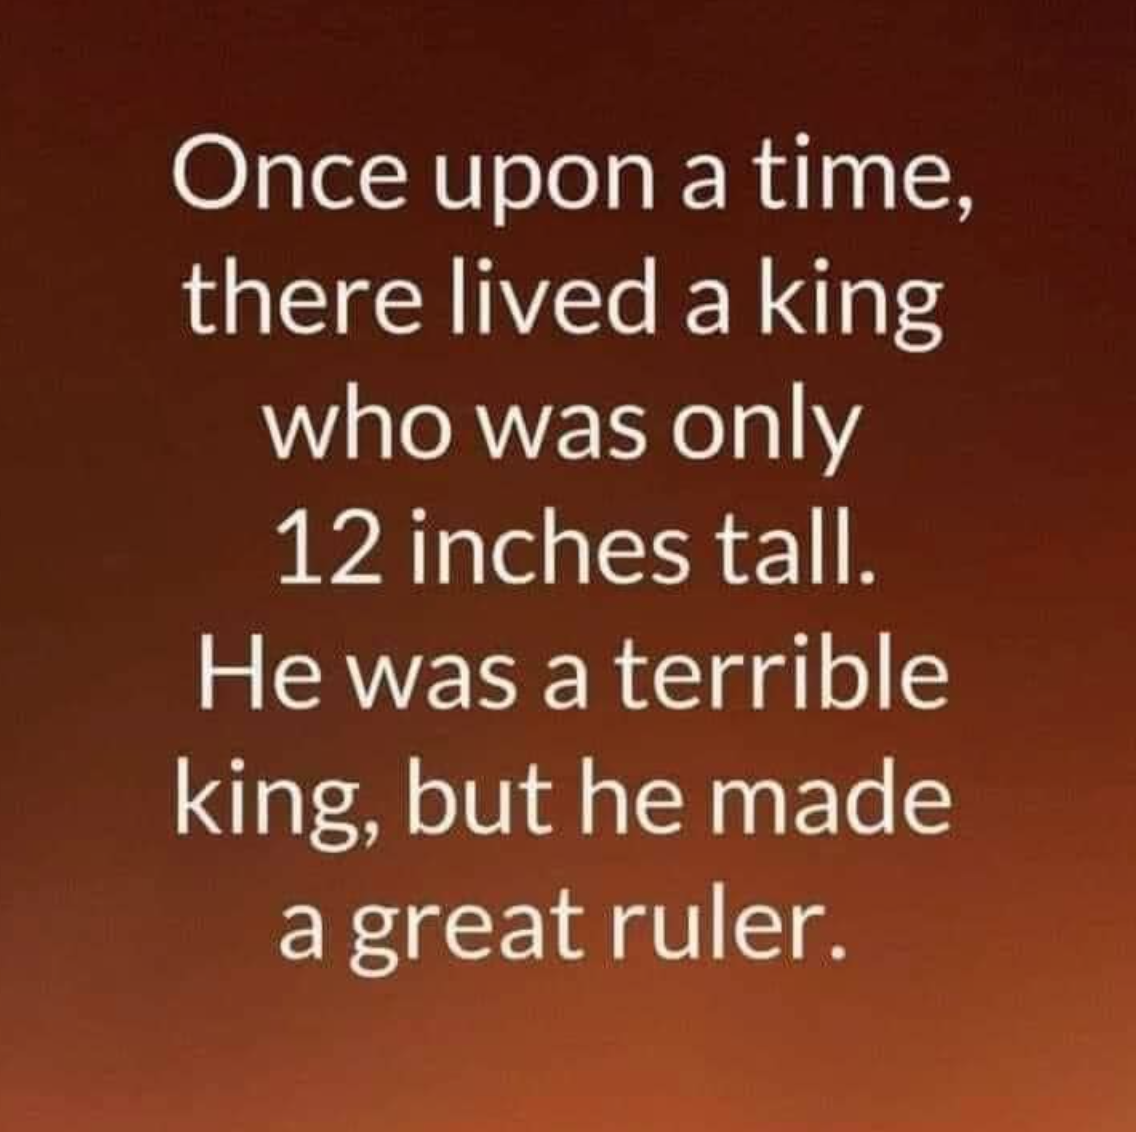 holidaycheck - Once upon a time, there lived a king who was only 12 inches tall. He was a terrible king, but he made a great ruler.